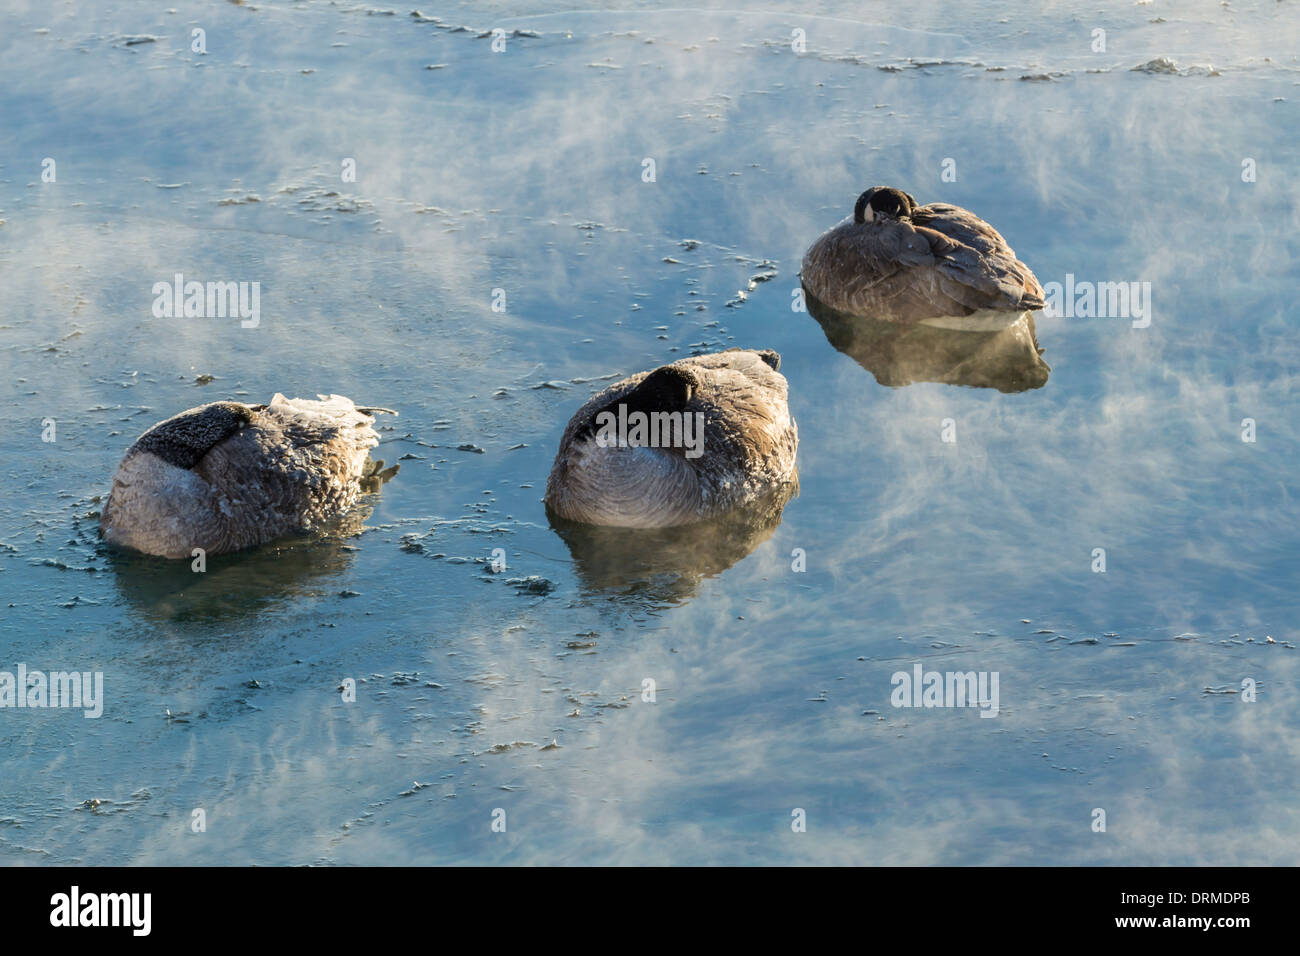 Canada Geese shield their faces from the cold as ice and steam forms around them in Lake Ontario under a deep arctic airmass. Stock Photo